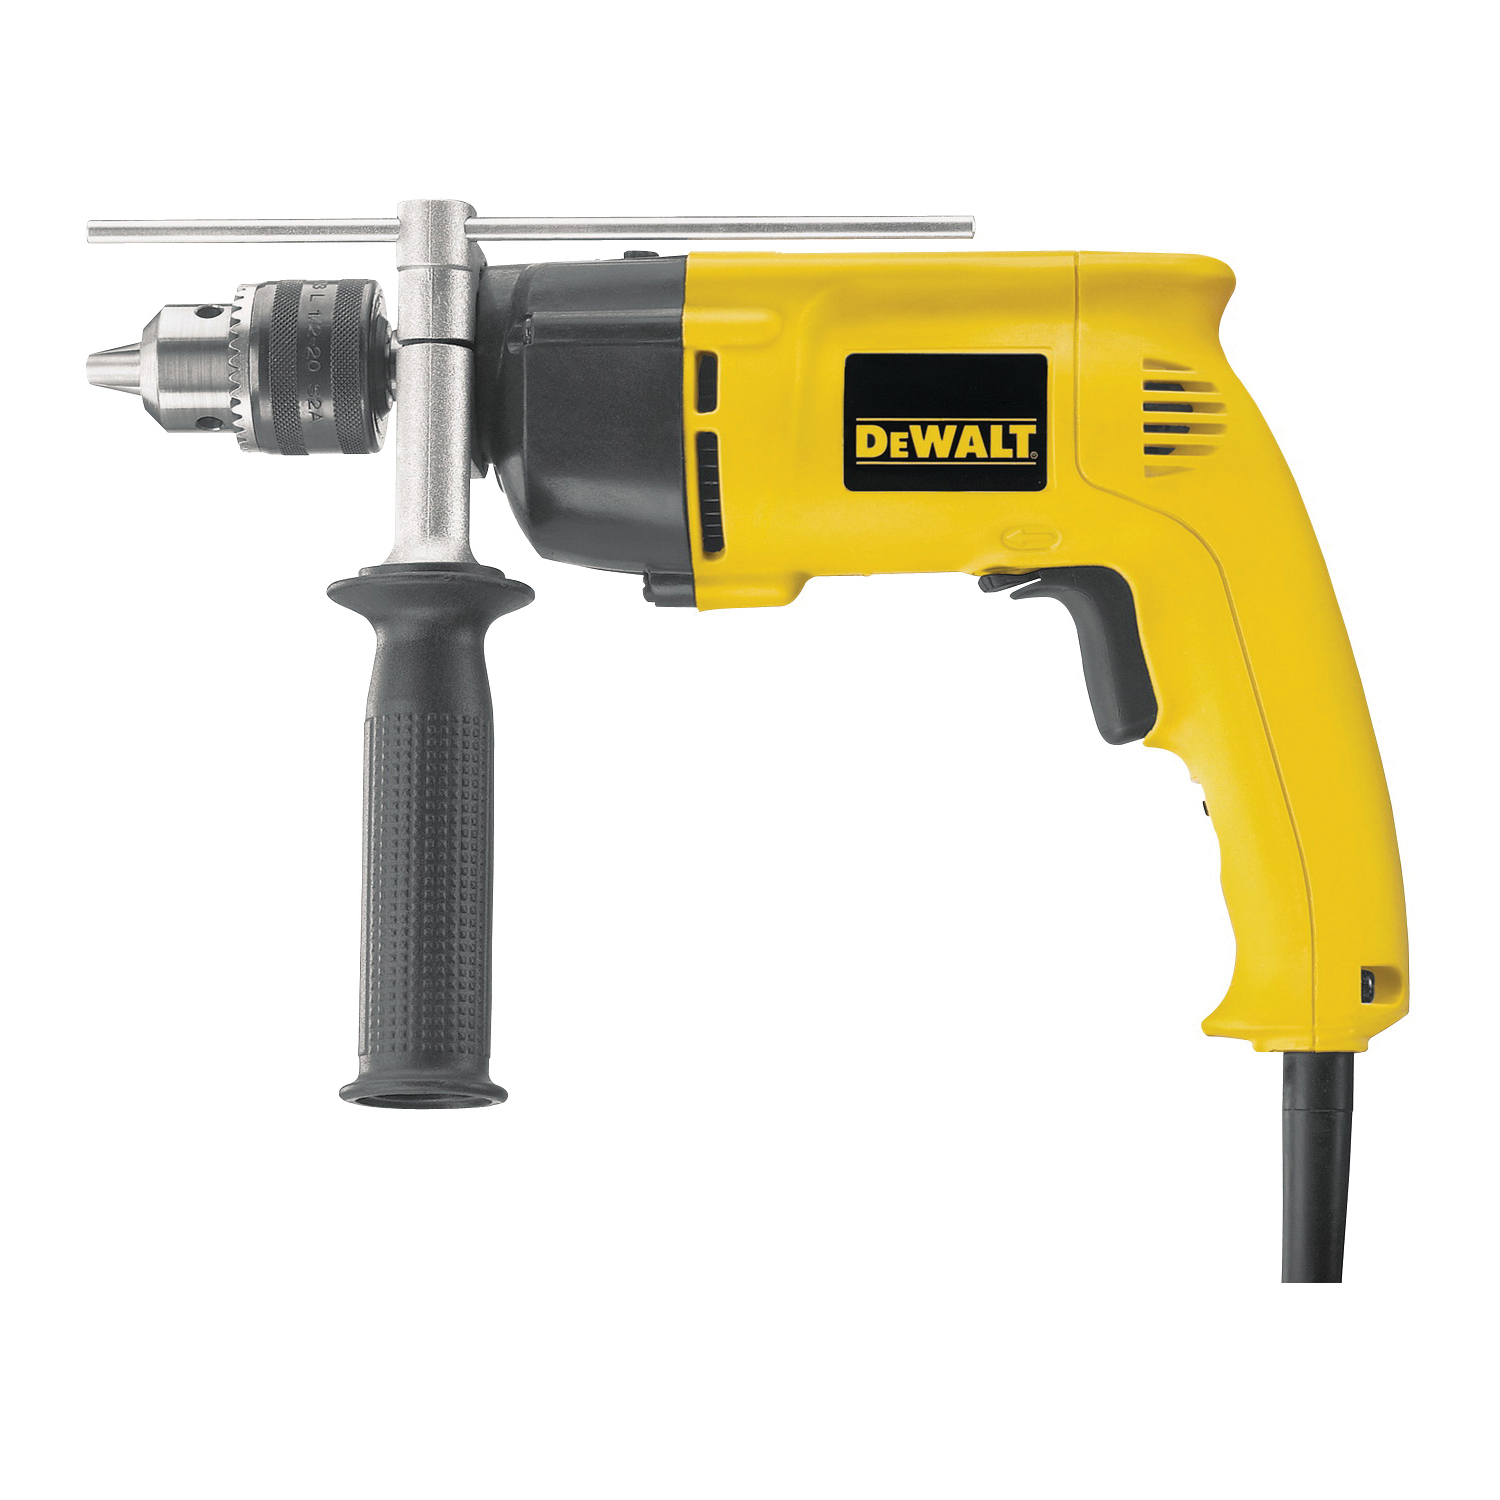 DW511 Hammer Drill, 8.5 A, Keyed Chuck, 1/2 in Chuck, 0 to 2700 rpm Speed